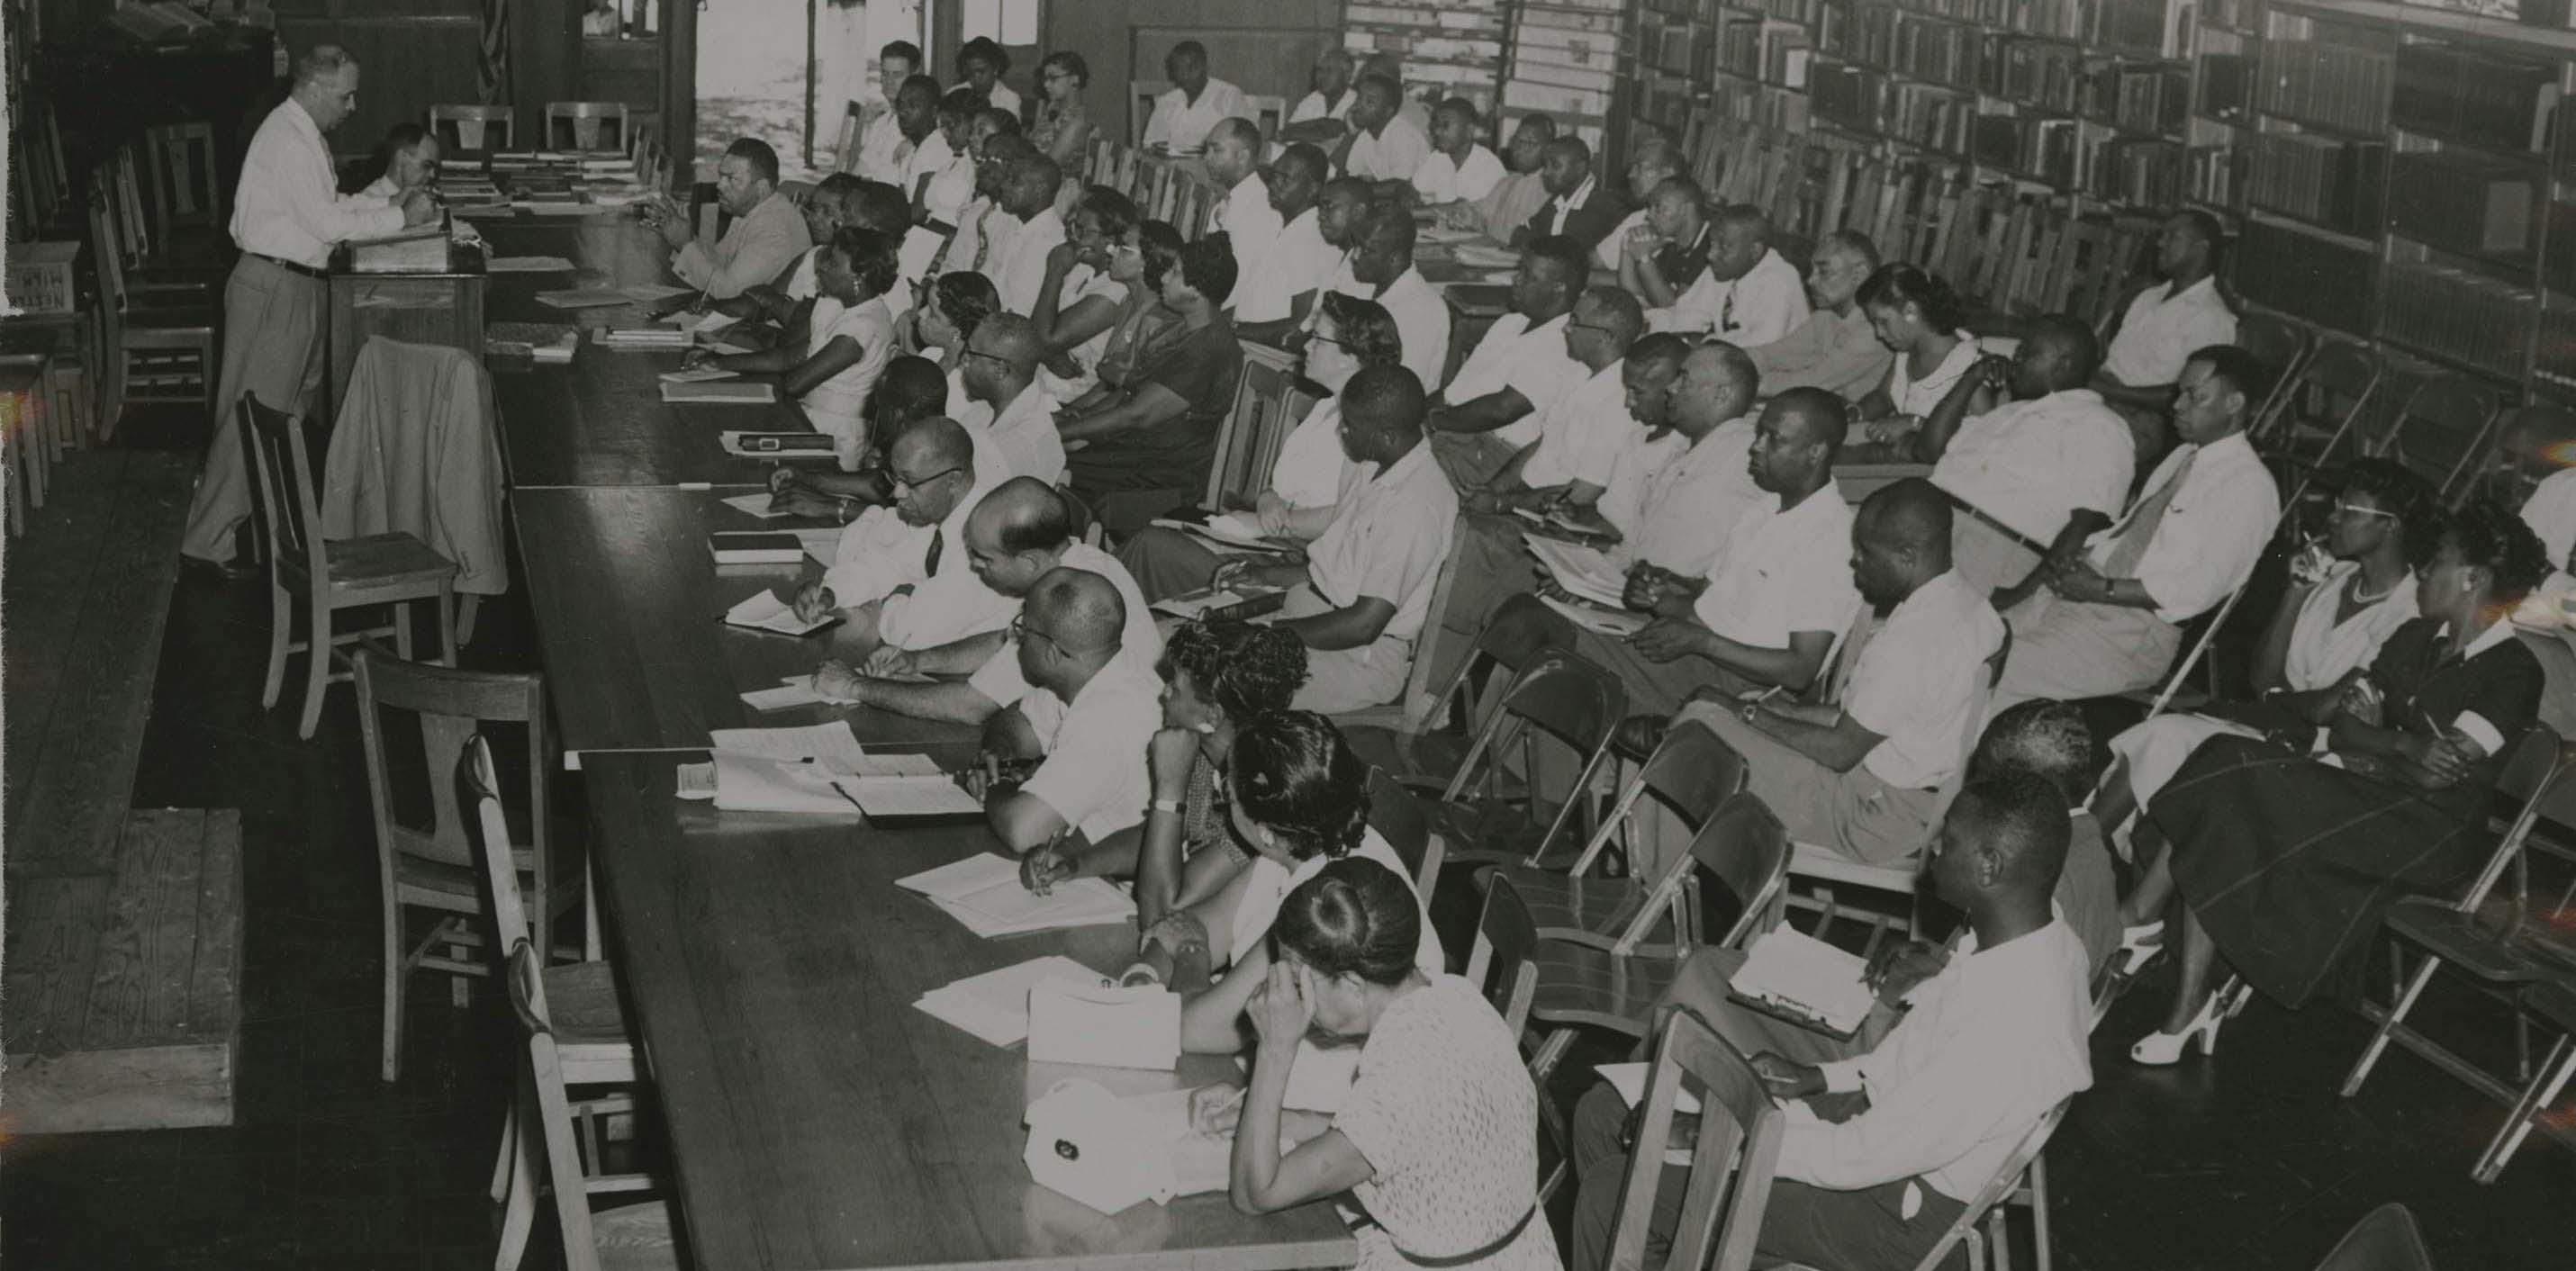 The Southern Education Foundation records include the administrative files of the John F. Slater Fund (1882-1937), the Negro Rural School Fund (Anna T. Jeanes Fund)(1907-1937), and the Southern Education Foundation (SEF). The records of these organizations document the activities of philanthropists and educators in helping to provide African Americans in the South with greater educational opportunities. The records of both the John F. Slater Fund and the Anna T. Jeanes Fund include minutes of meetings, annual reports, financial records, and application forms from various states requesting educational aid. The materials in this digital collection represent photographs and scrapbooks ranging from the 1930s to the 1960s. and audio recordings from a meeting in 1997.

At the AUC Robert W. Woodruff Library we are always striving to improve our digital collections. We welcome additional information about people, places, or events depicted in any of the works in this collection. To submit information, please contact us at DSD@auctr.edu. 